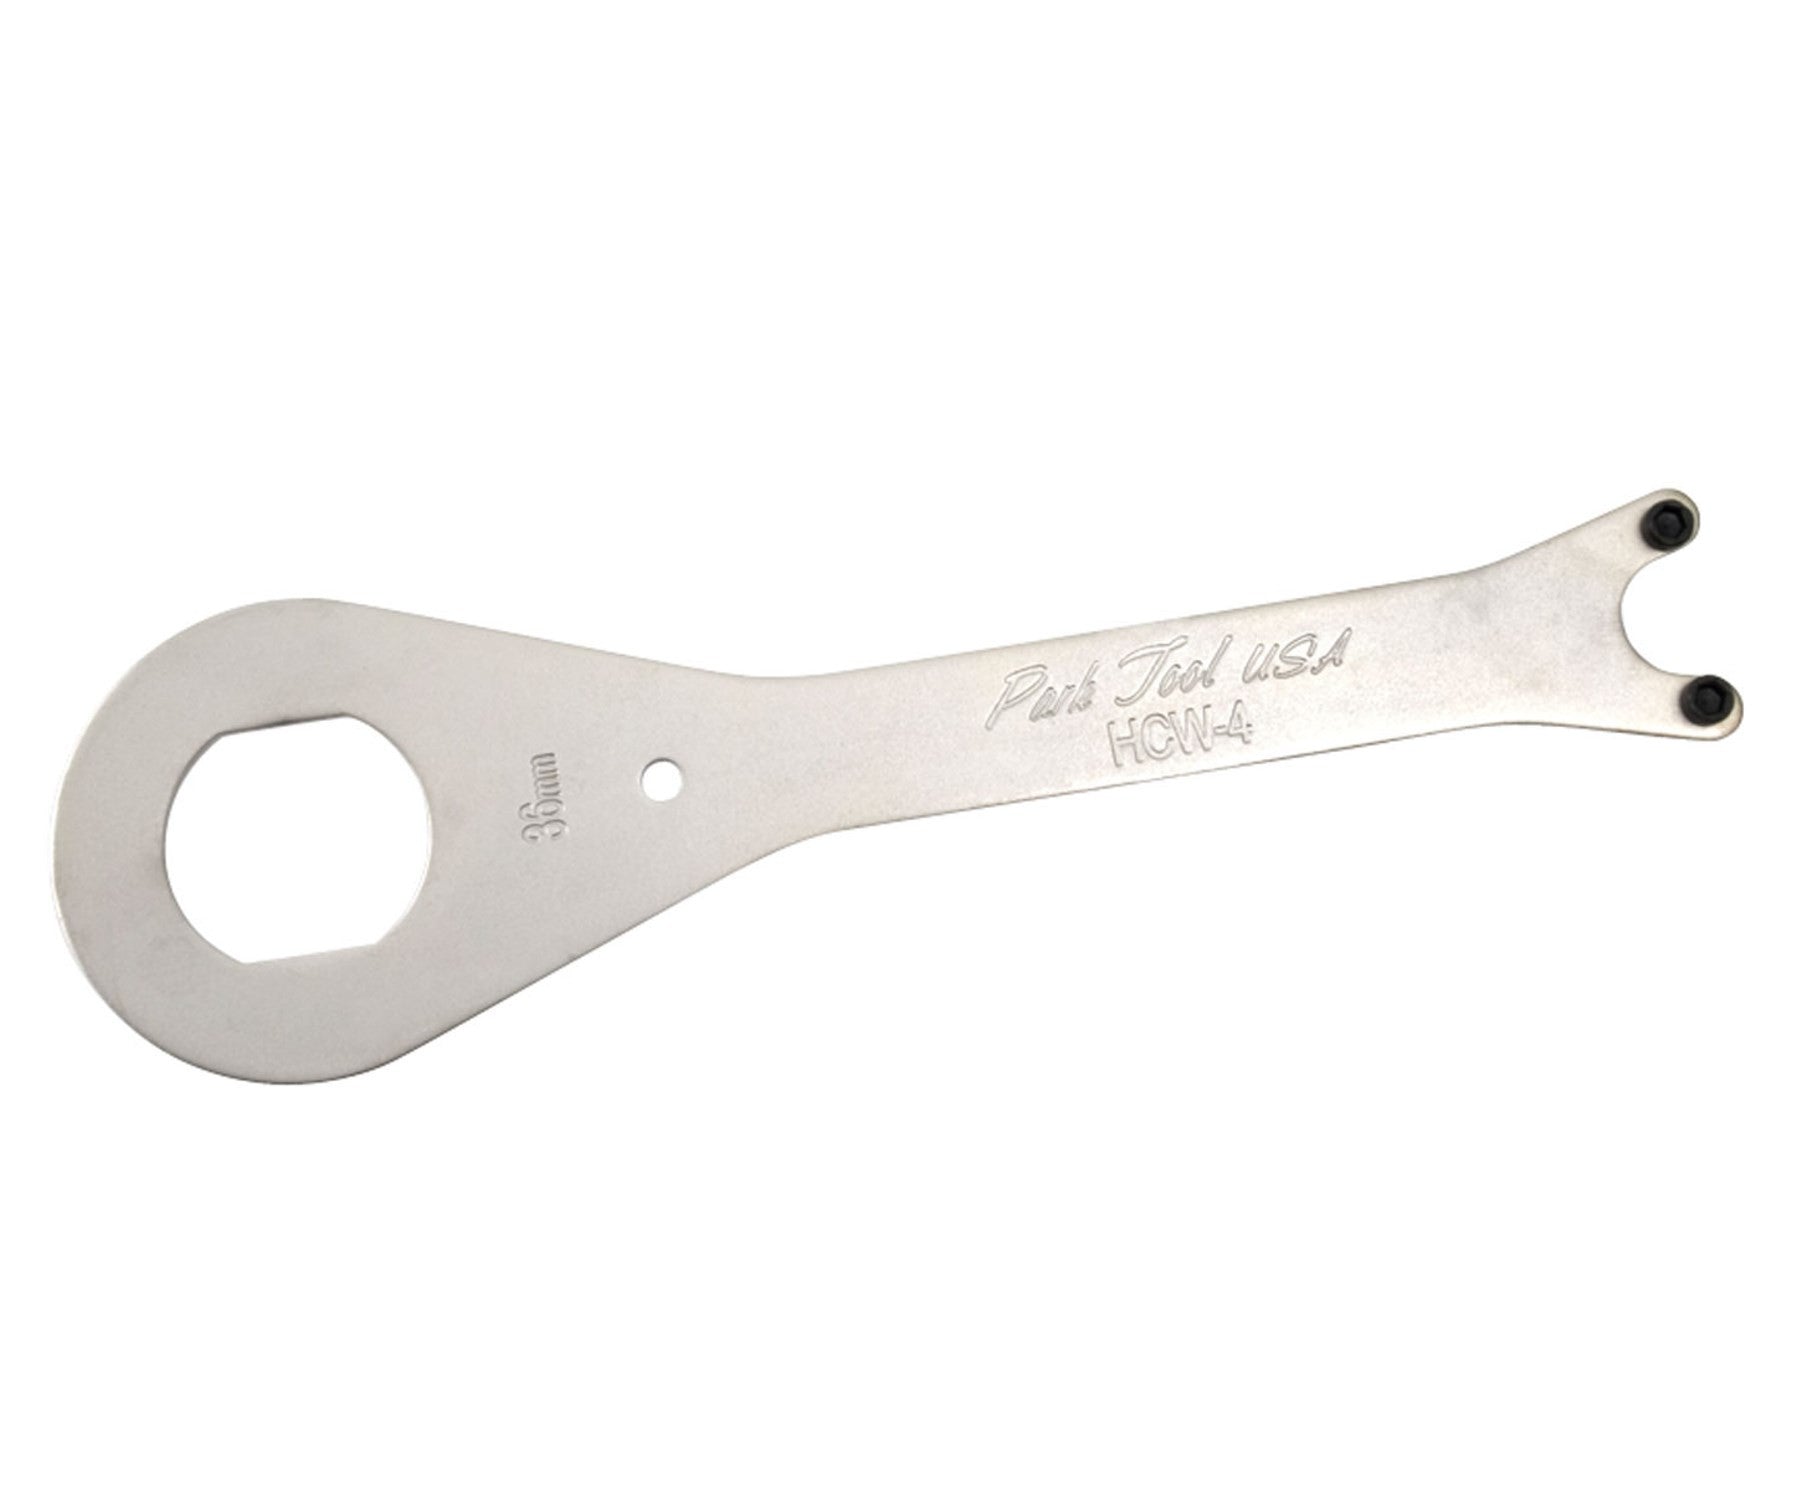 Tool - Stein bb fixed cup wrench clamp